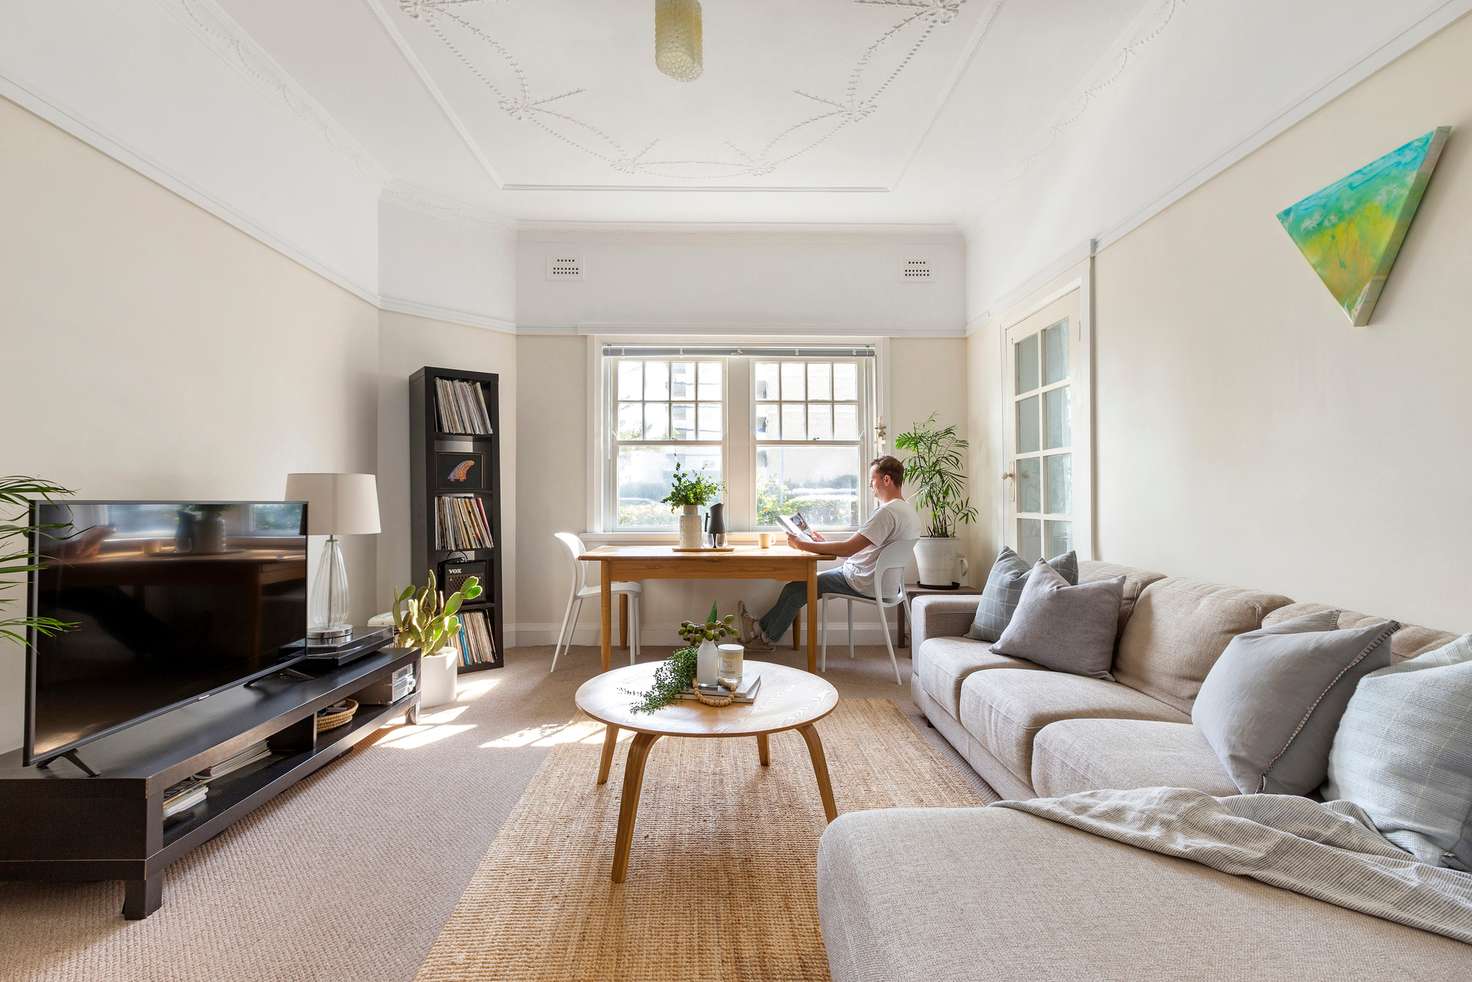 Main view of Homely apartment listing, 1/2 Victoria Parade, Manly NSW 2095